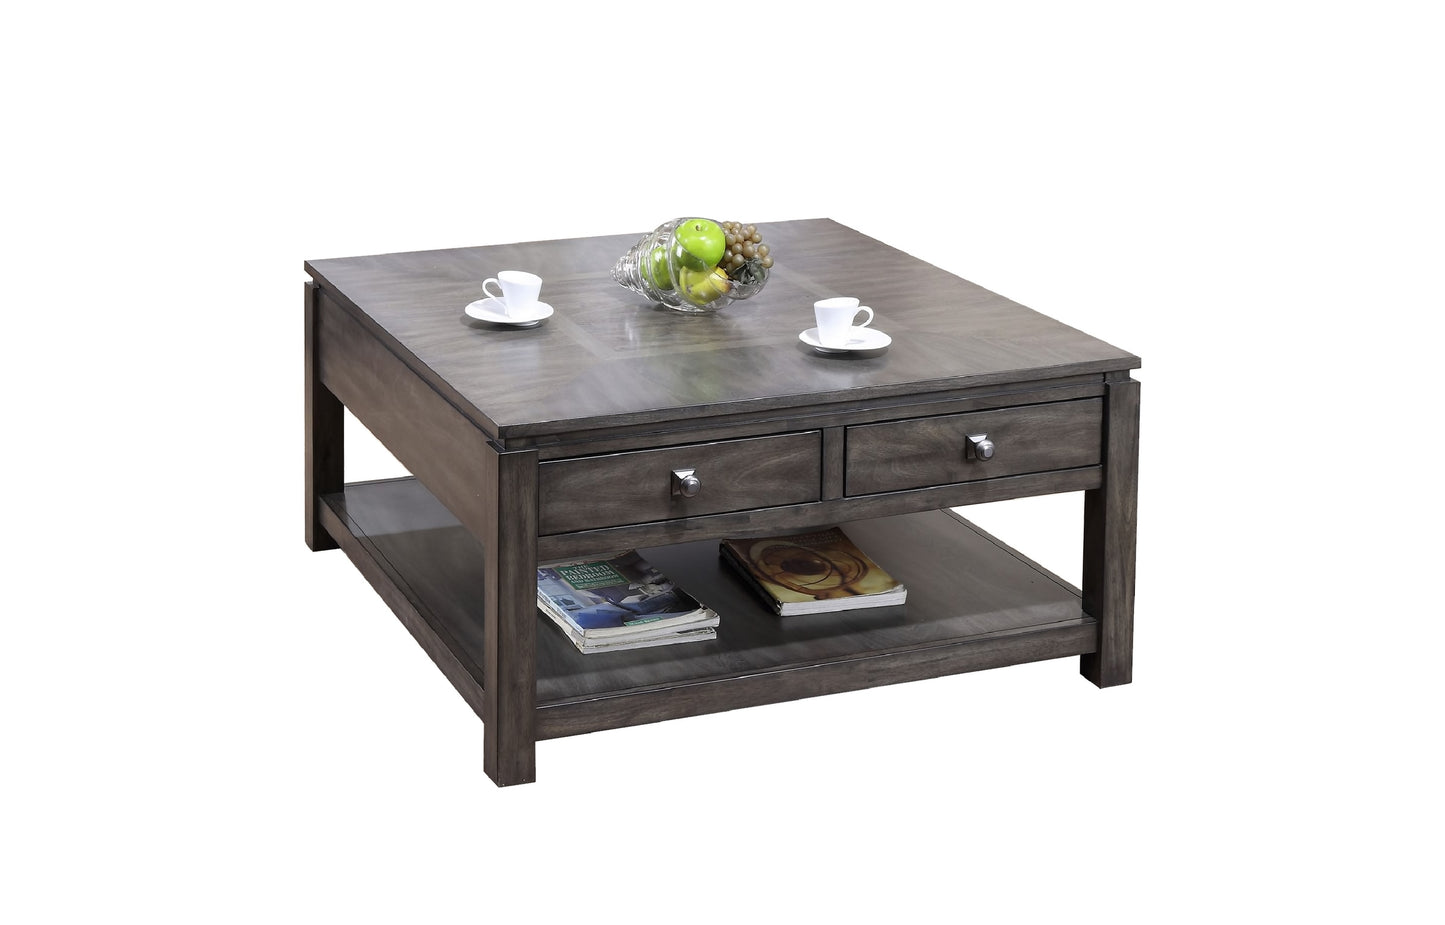 Lancaster 40" Square Coffee Table